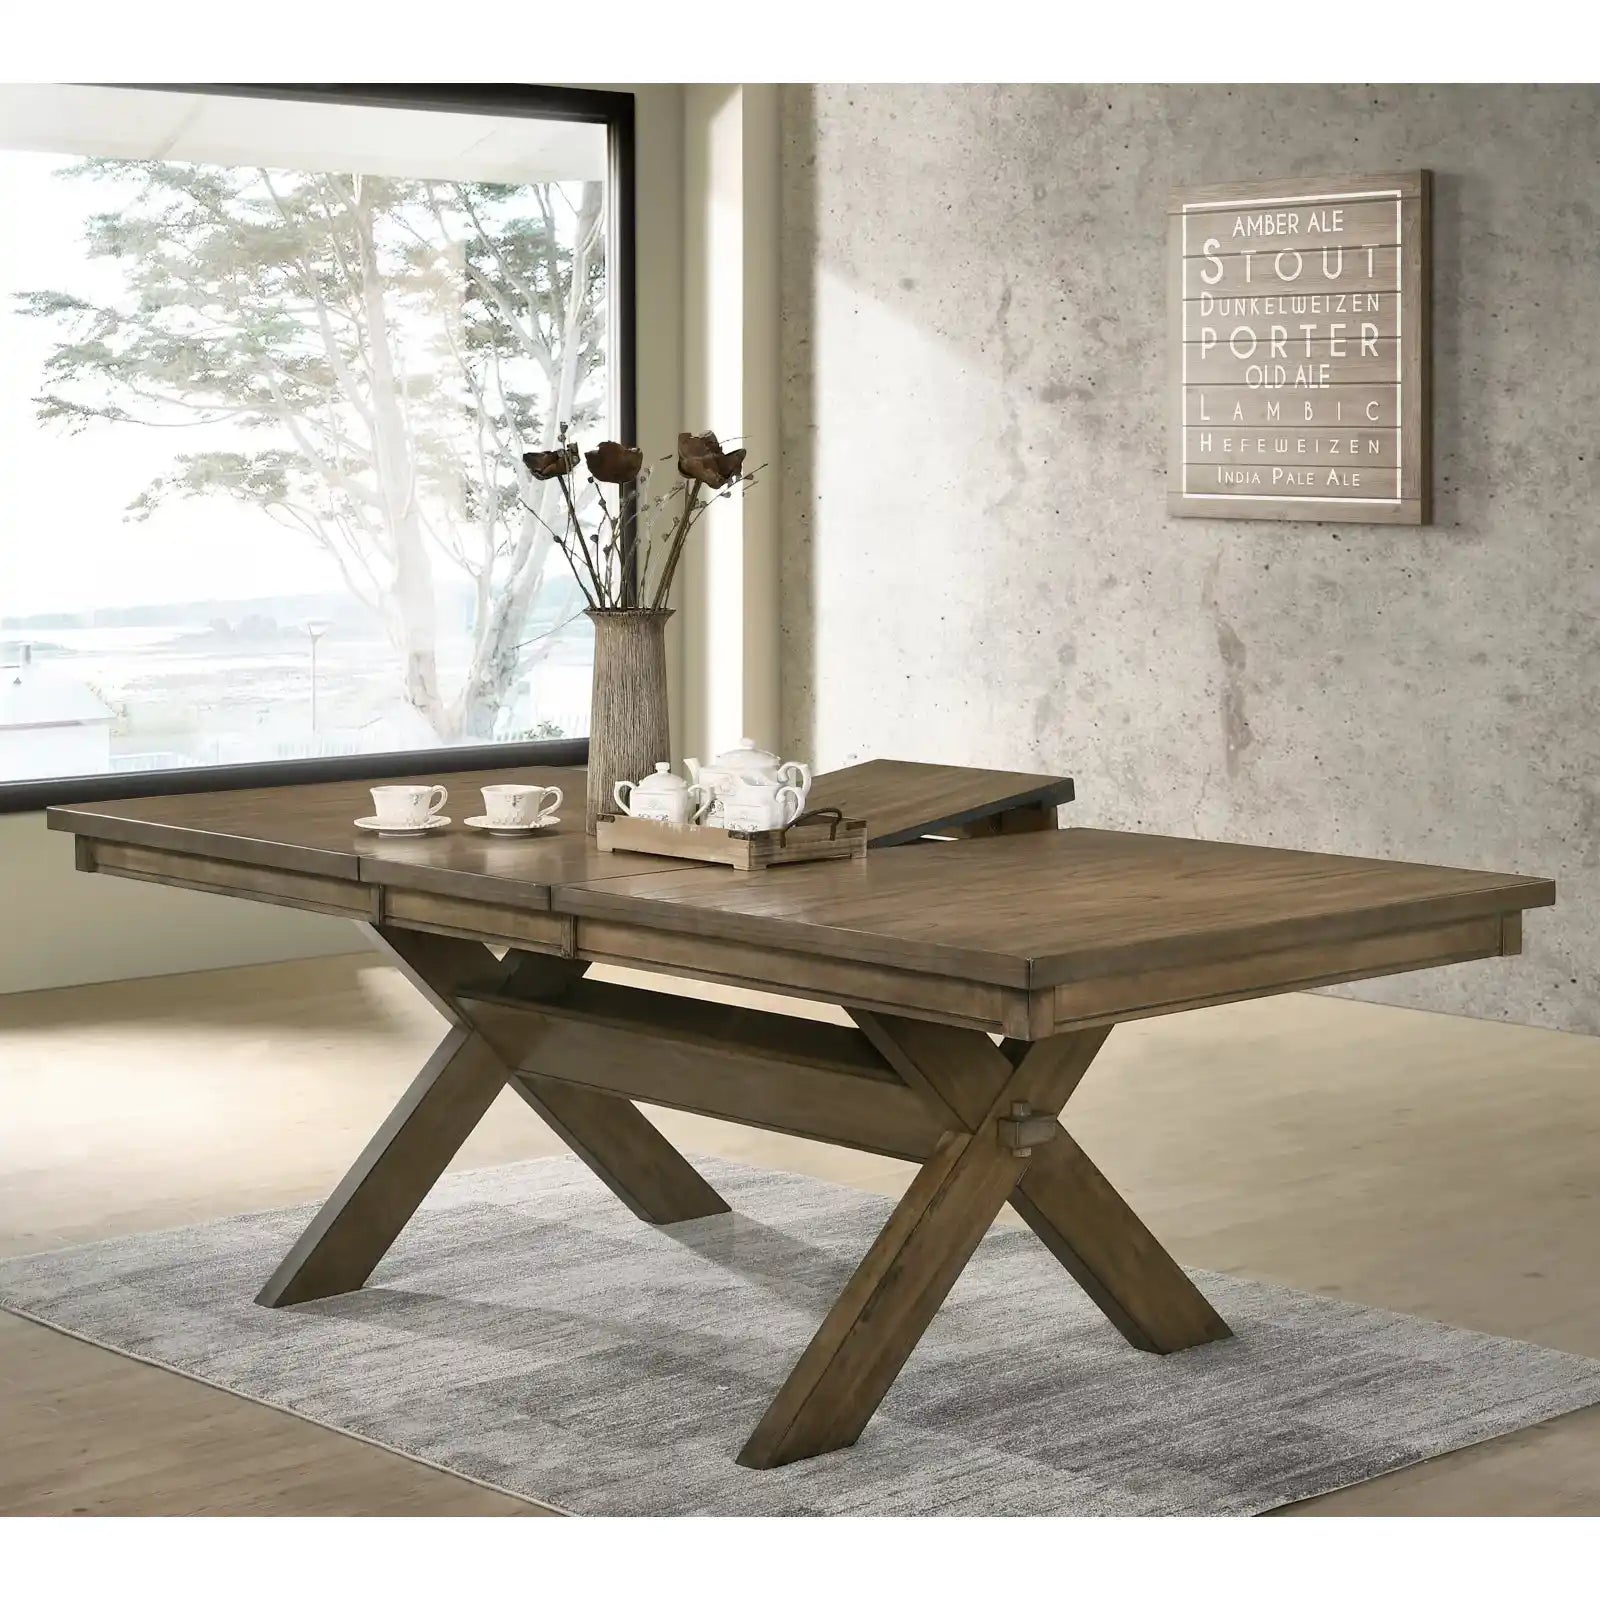 Distressed Solid Wood Dining Set